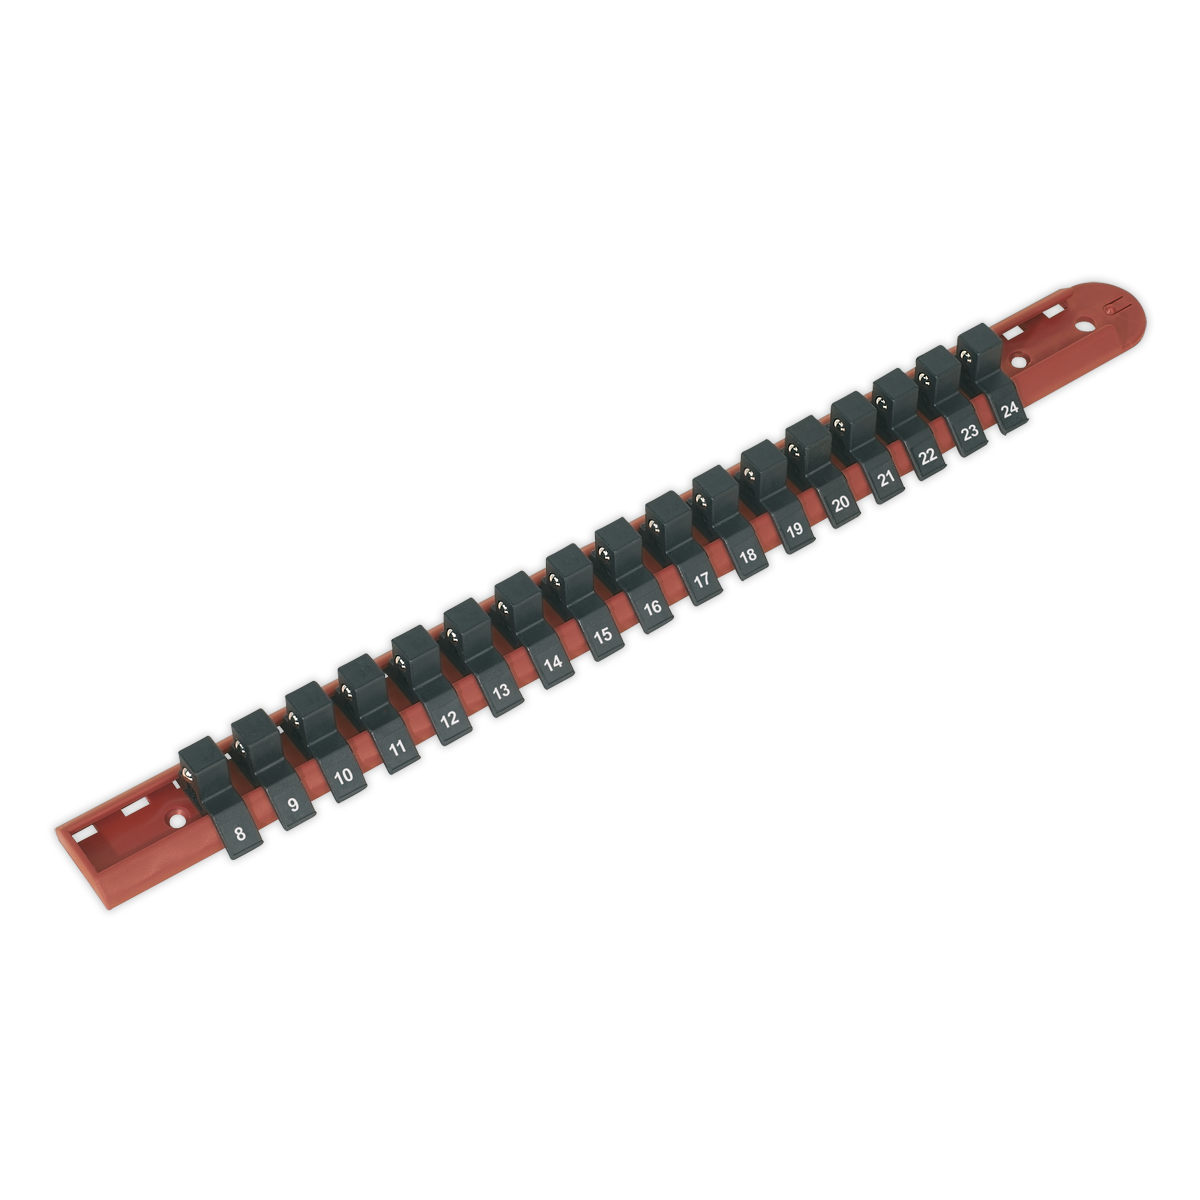 SEALEY - AK1217 Socket Retaining Rail with 17 Clips 1/2"Sq Drive